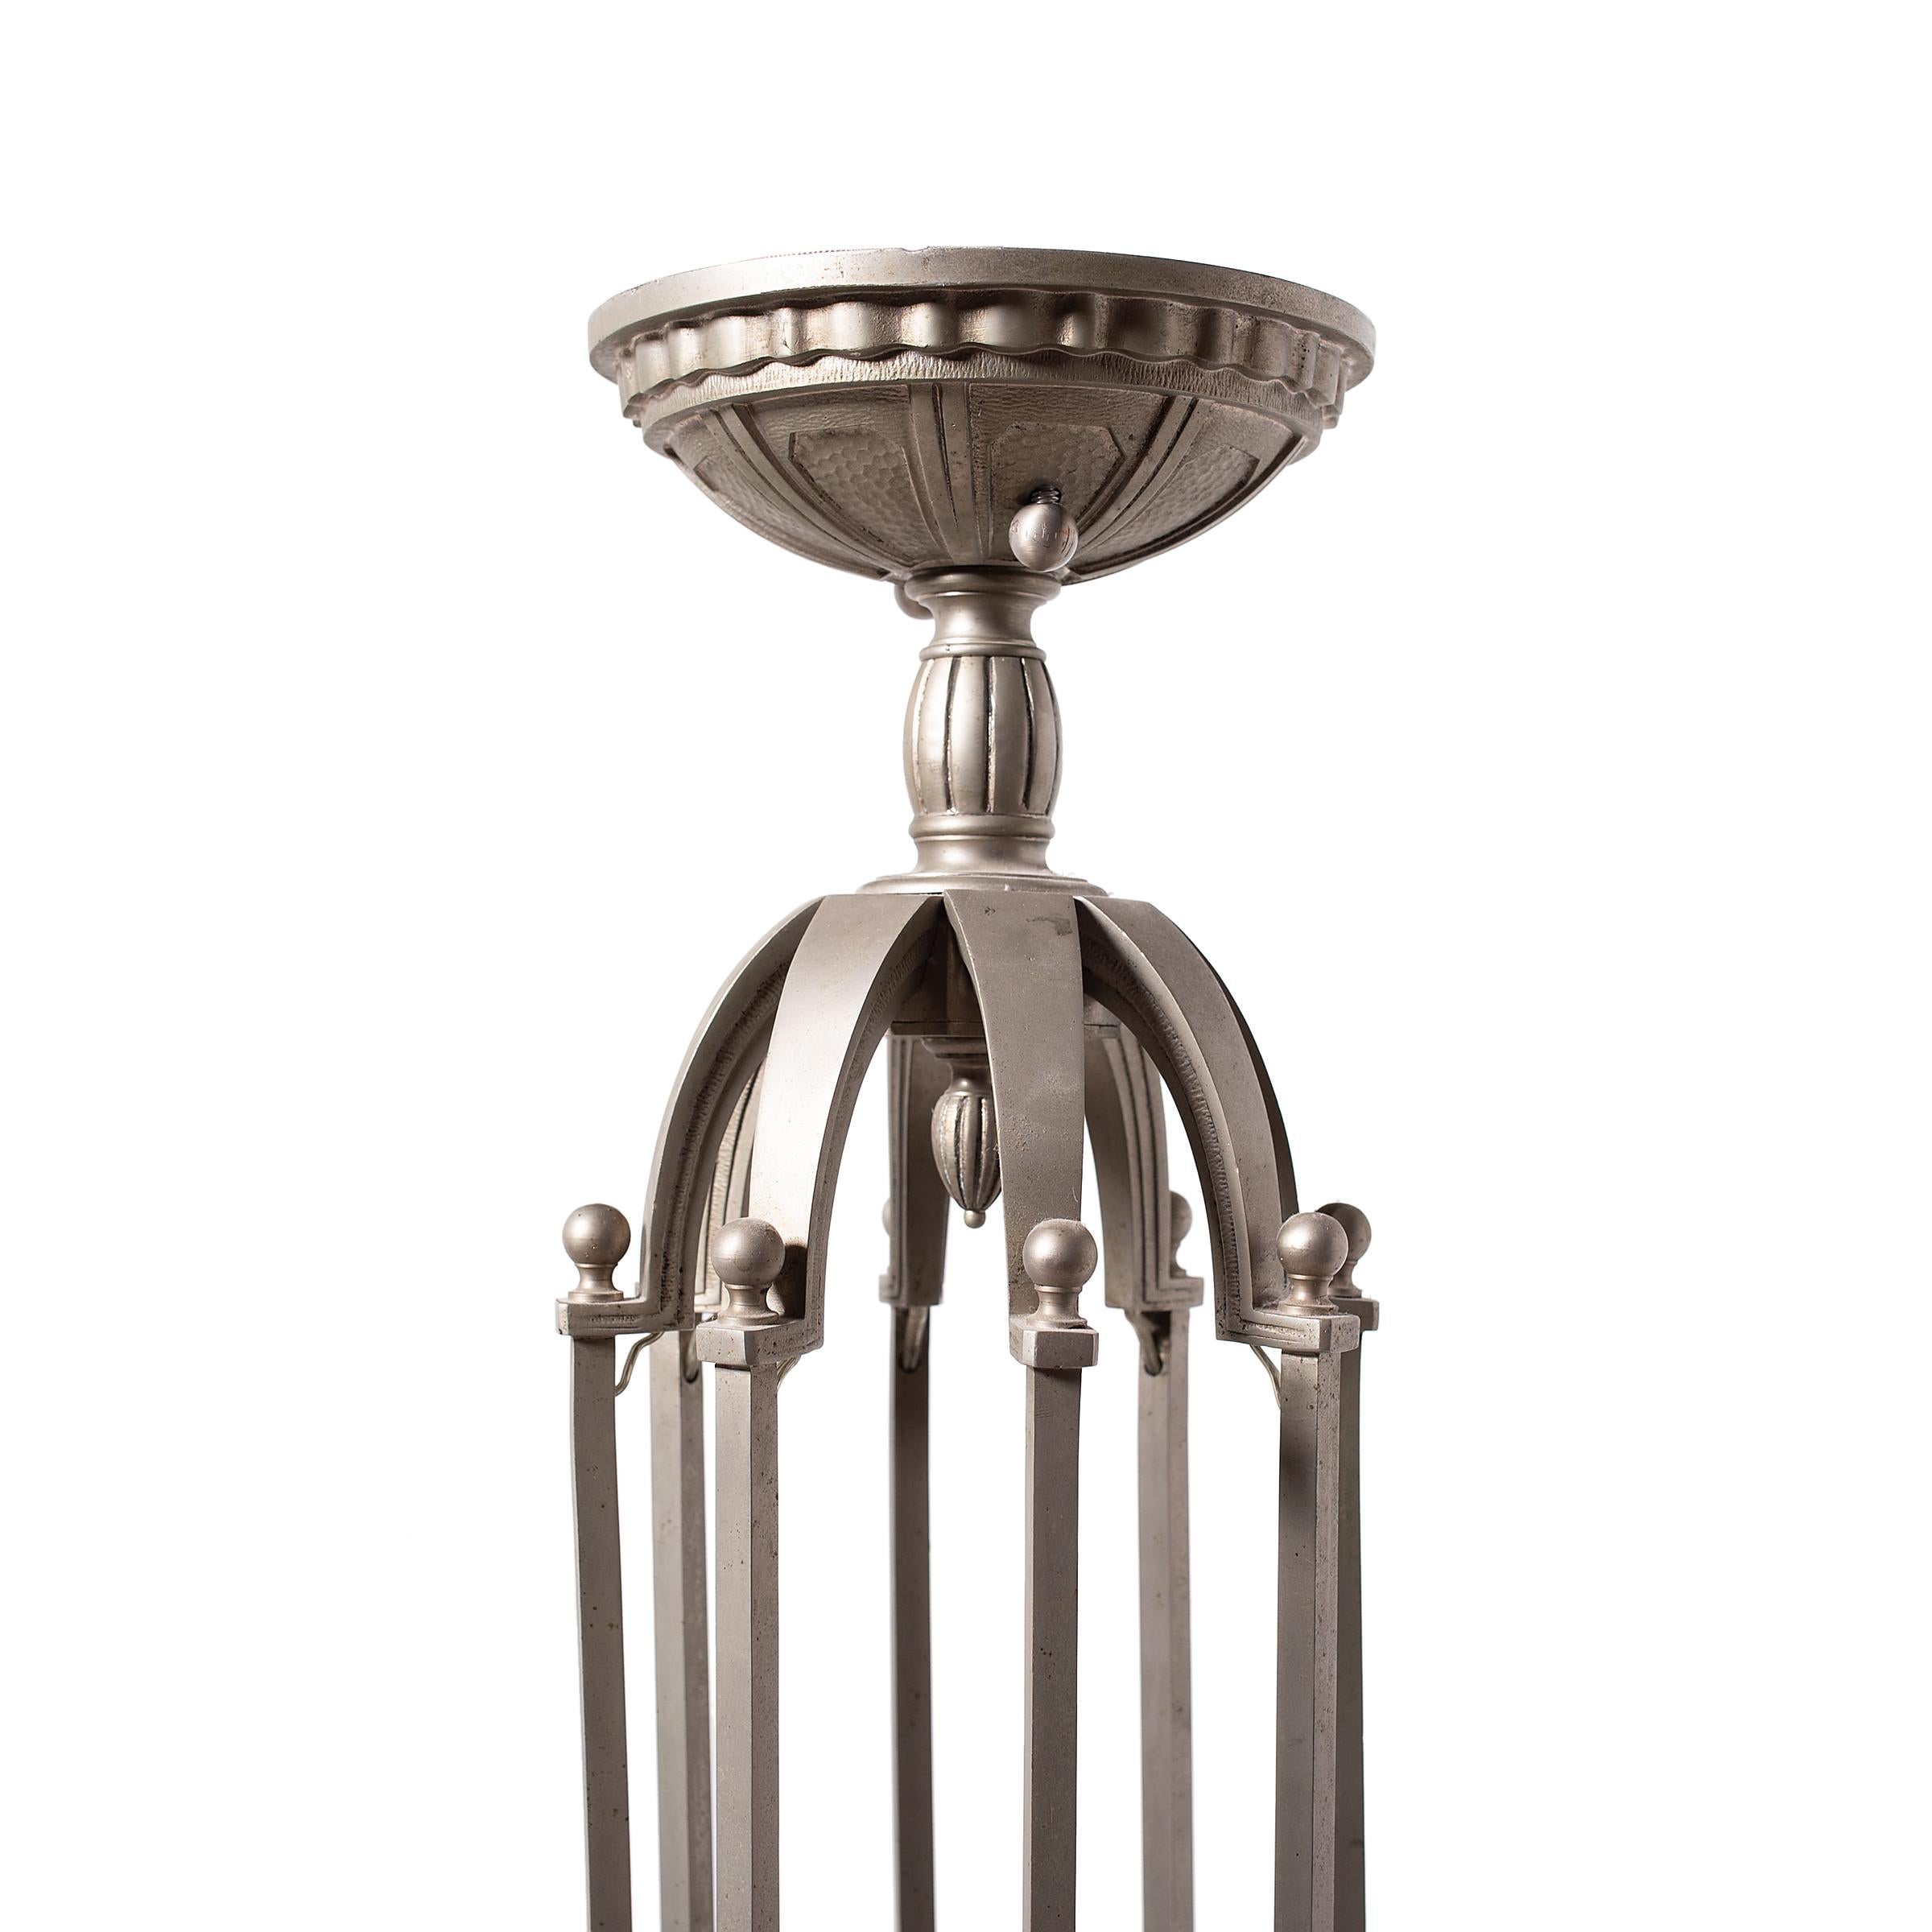 French Deco Chandelier Signed by Hettier & Vincent, c. 1930 For Sale 3